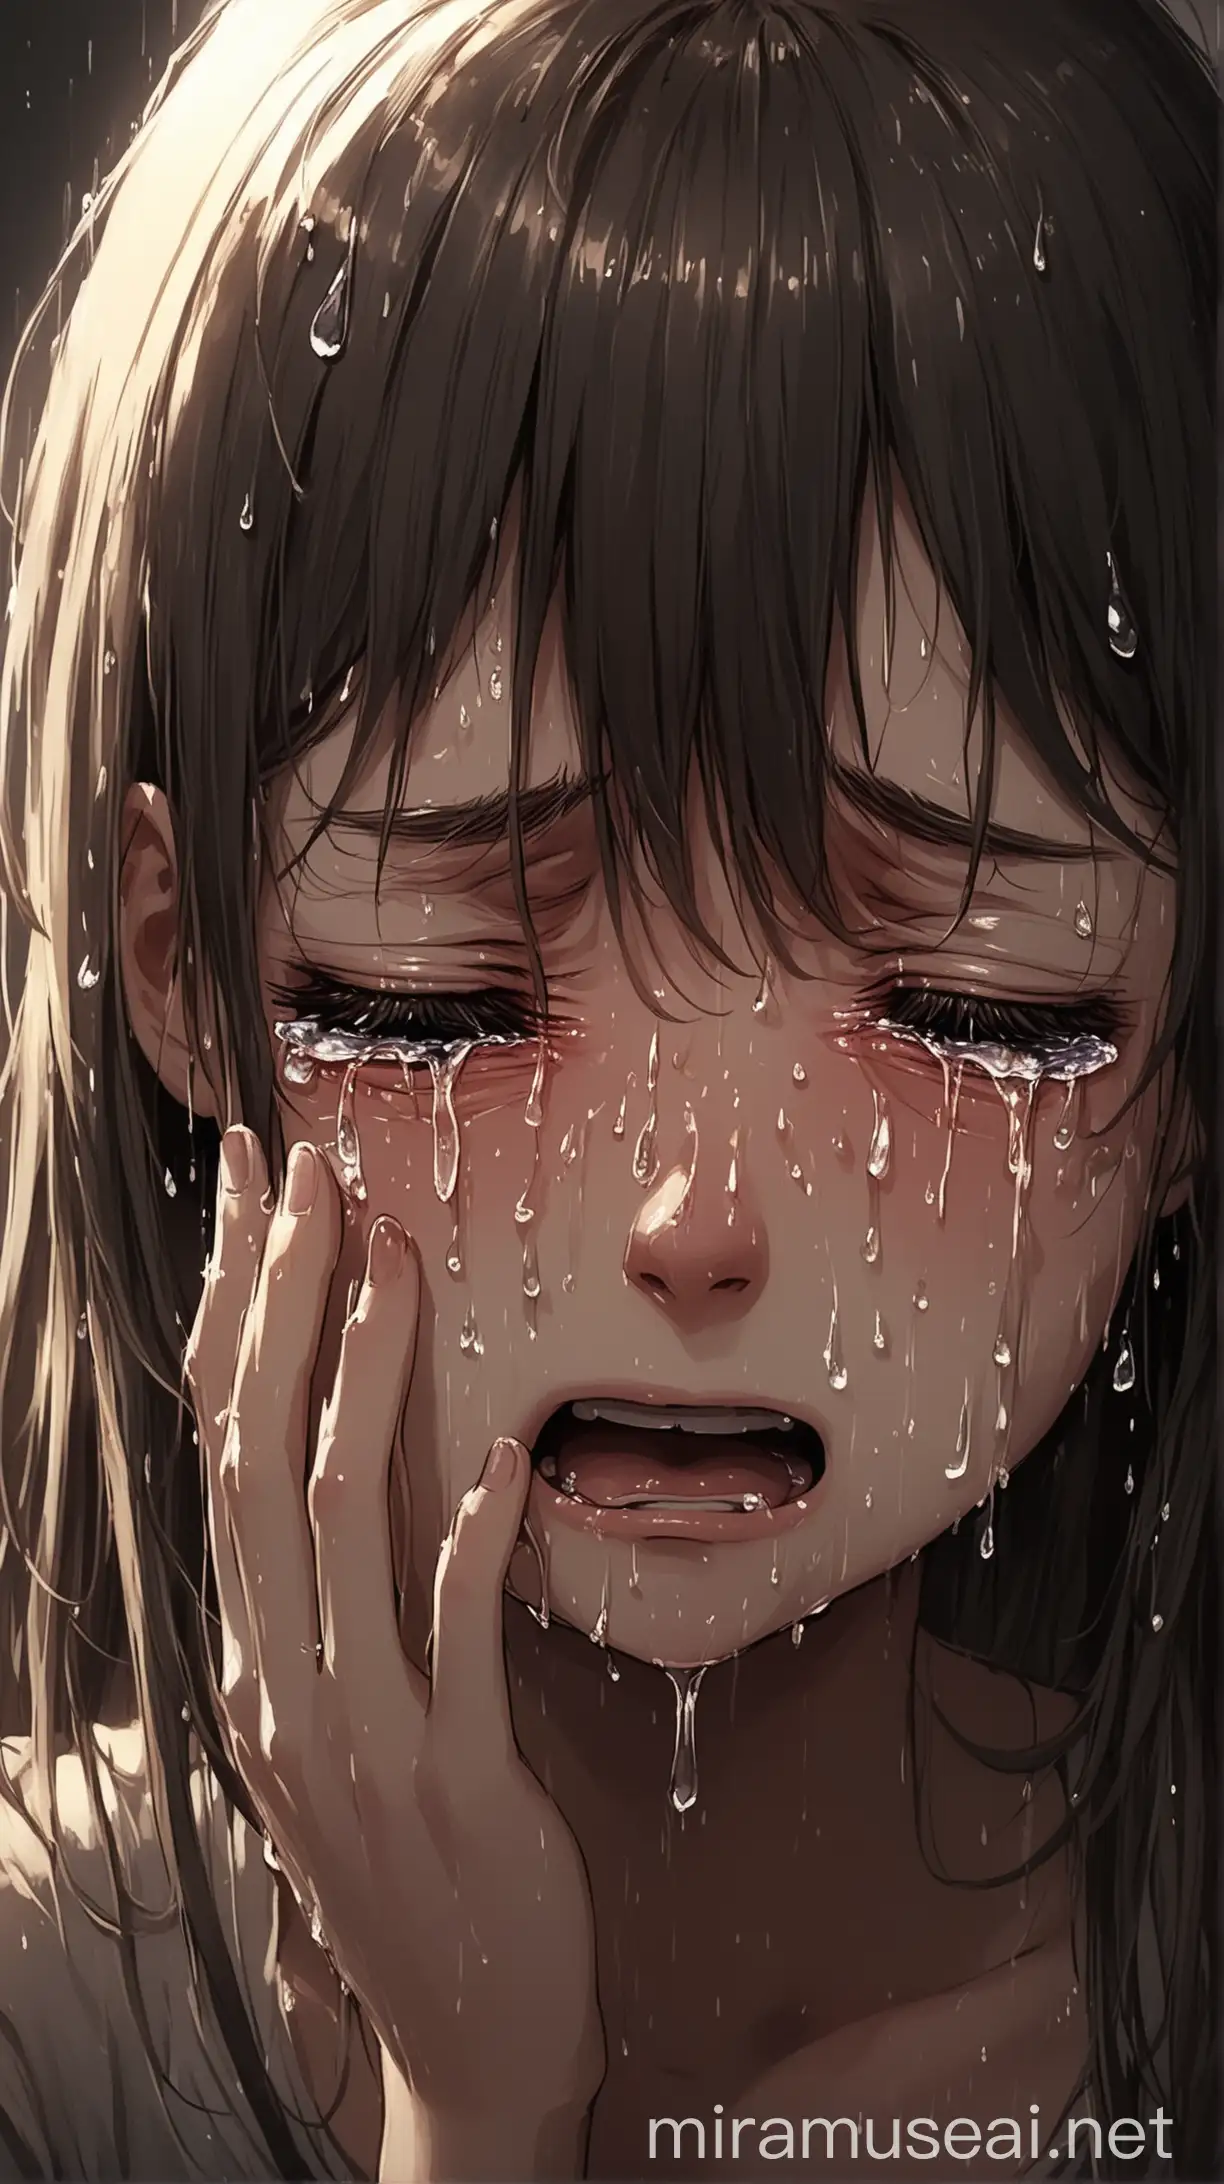 Girl Crying Tears of Sorrow in a Lonely Setting